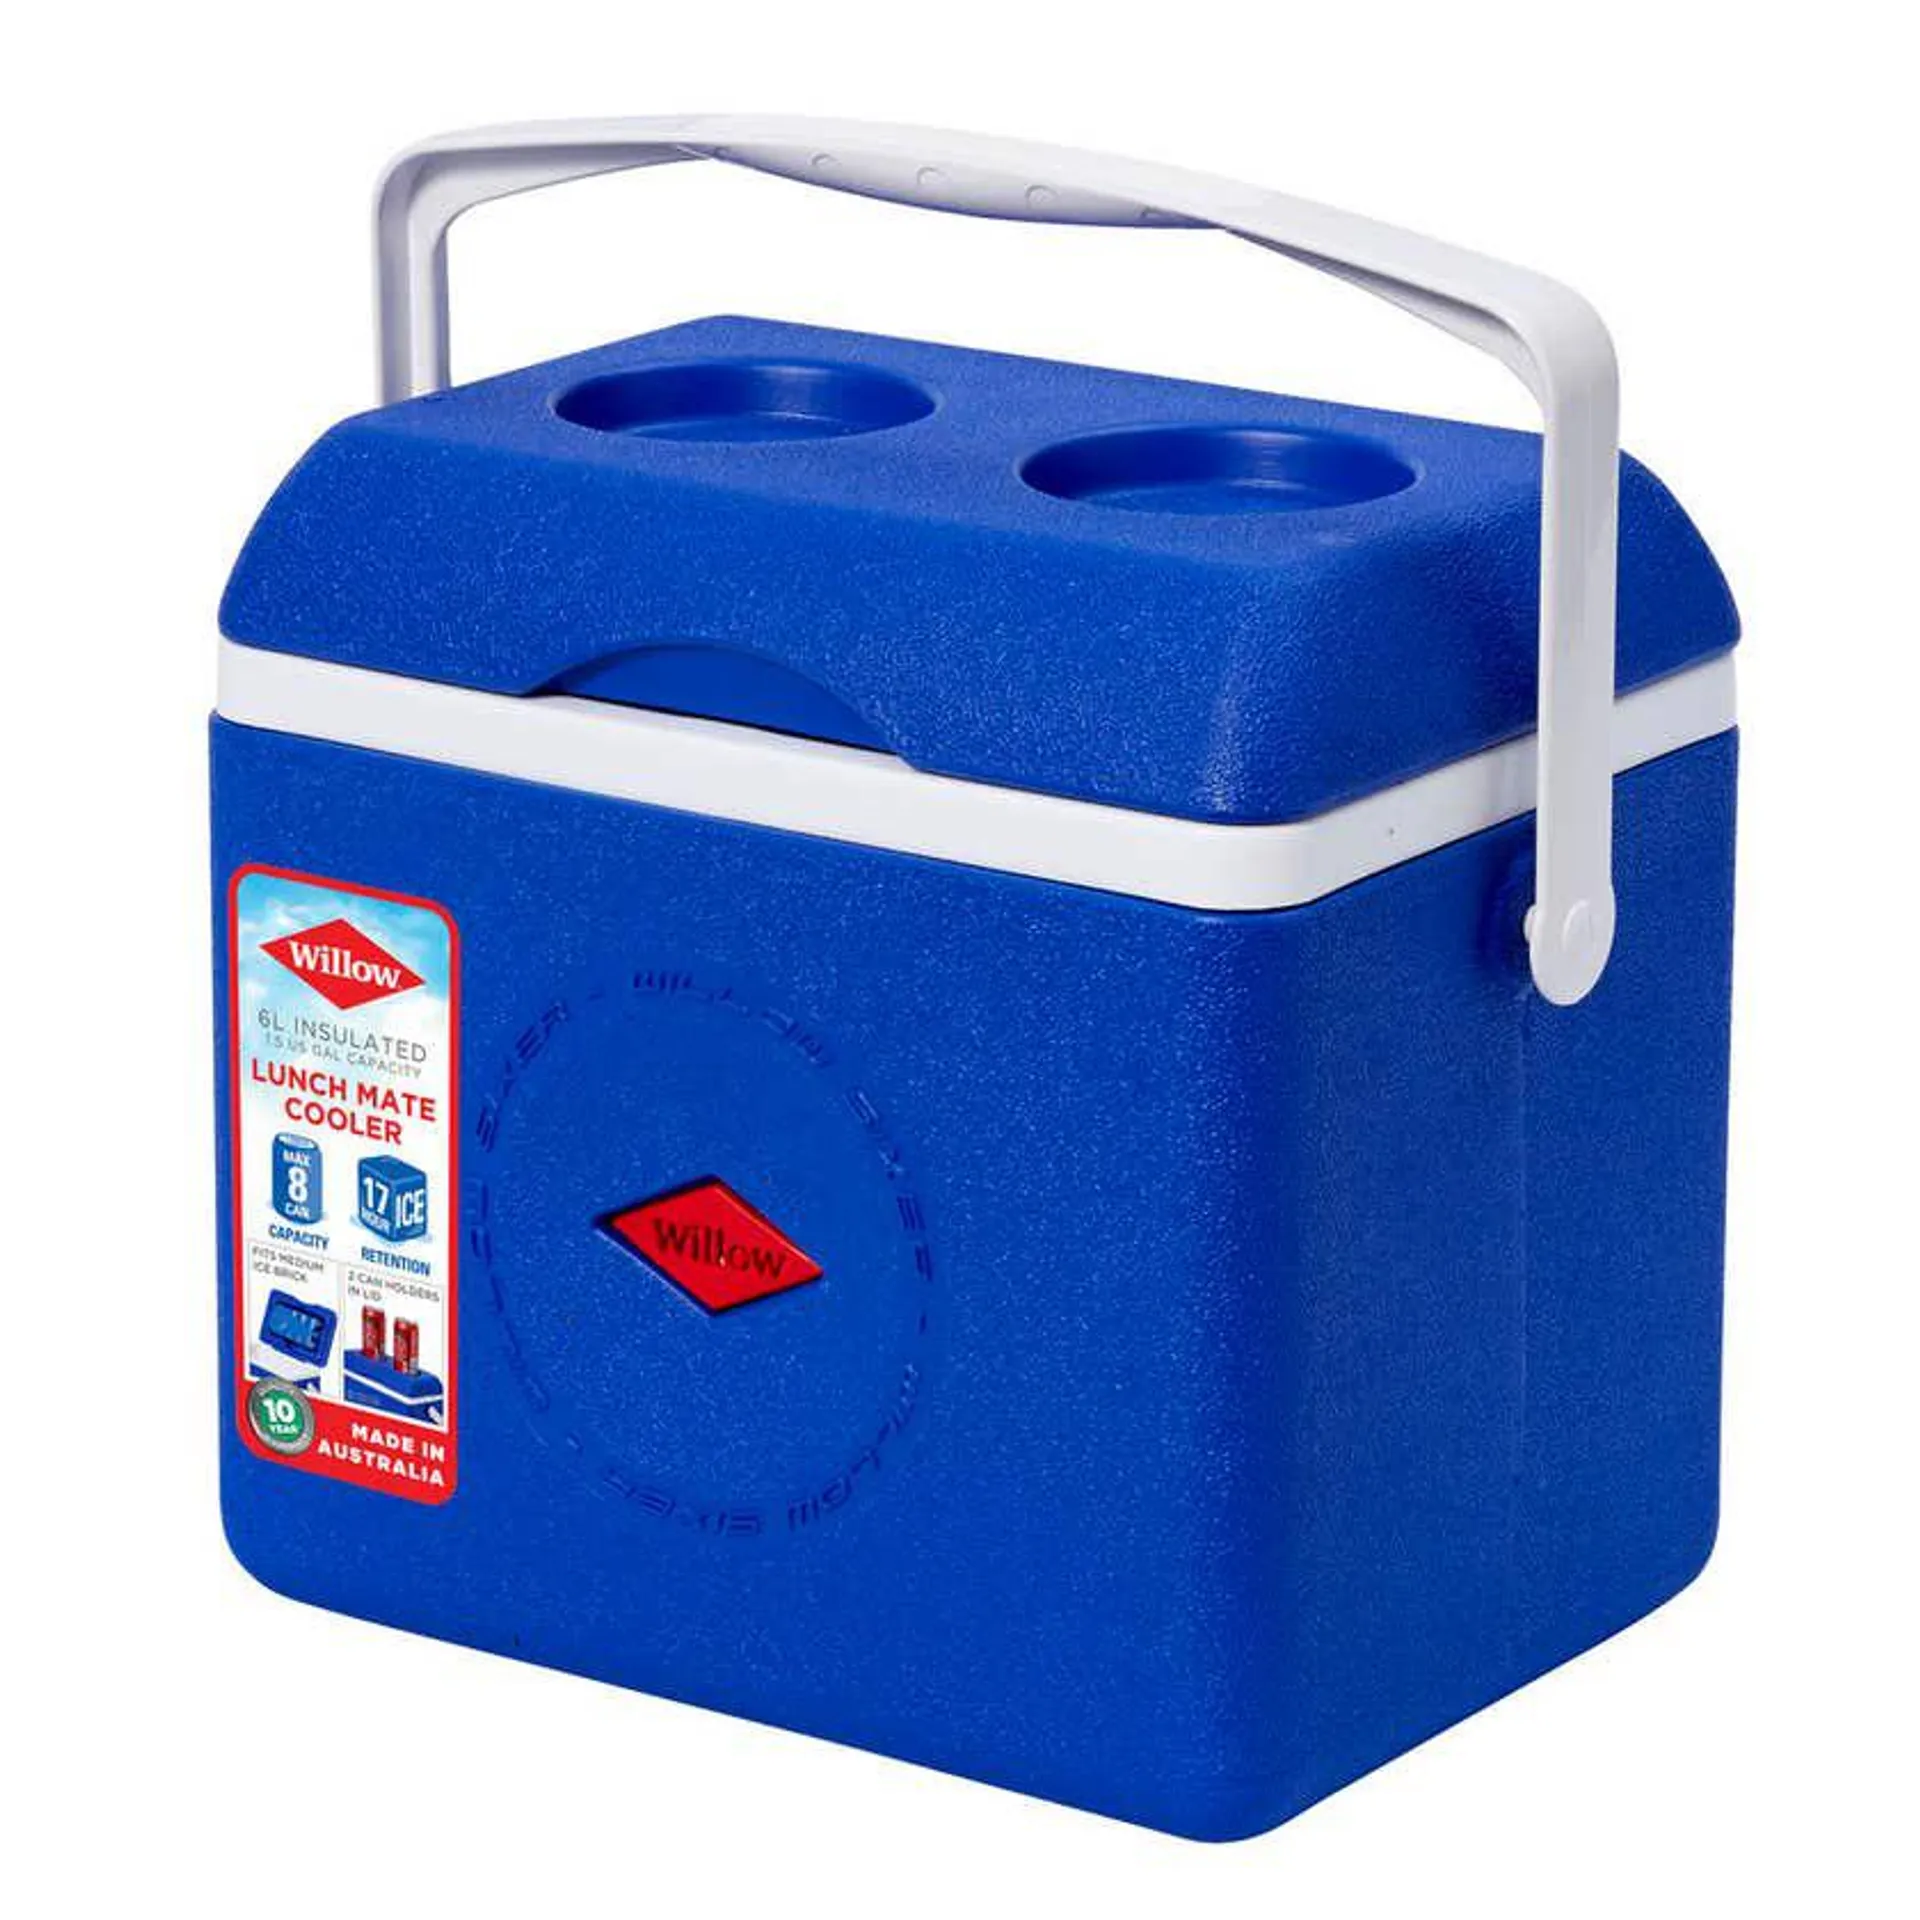 Willow Cooler Sixer 6L